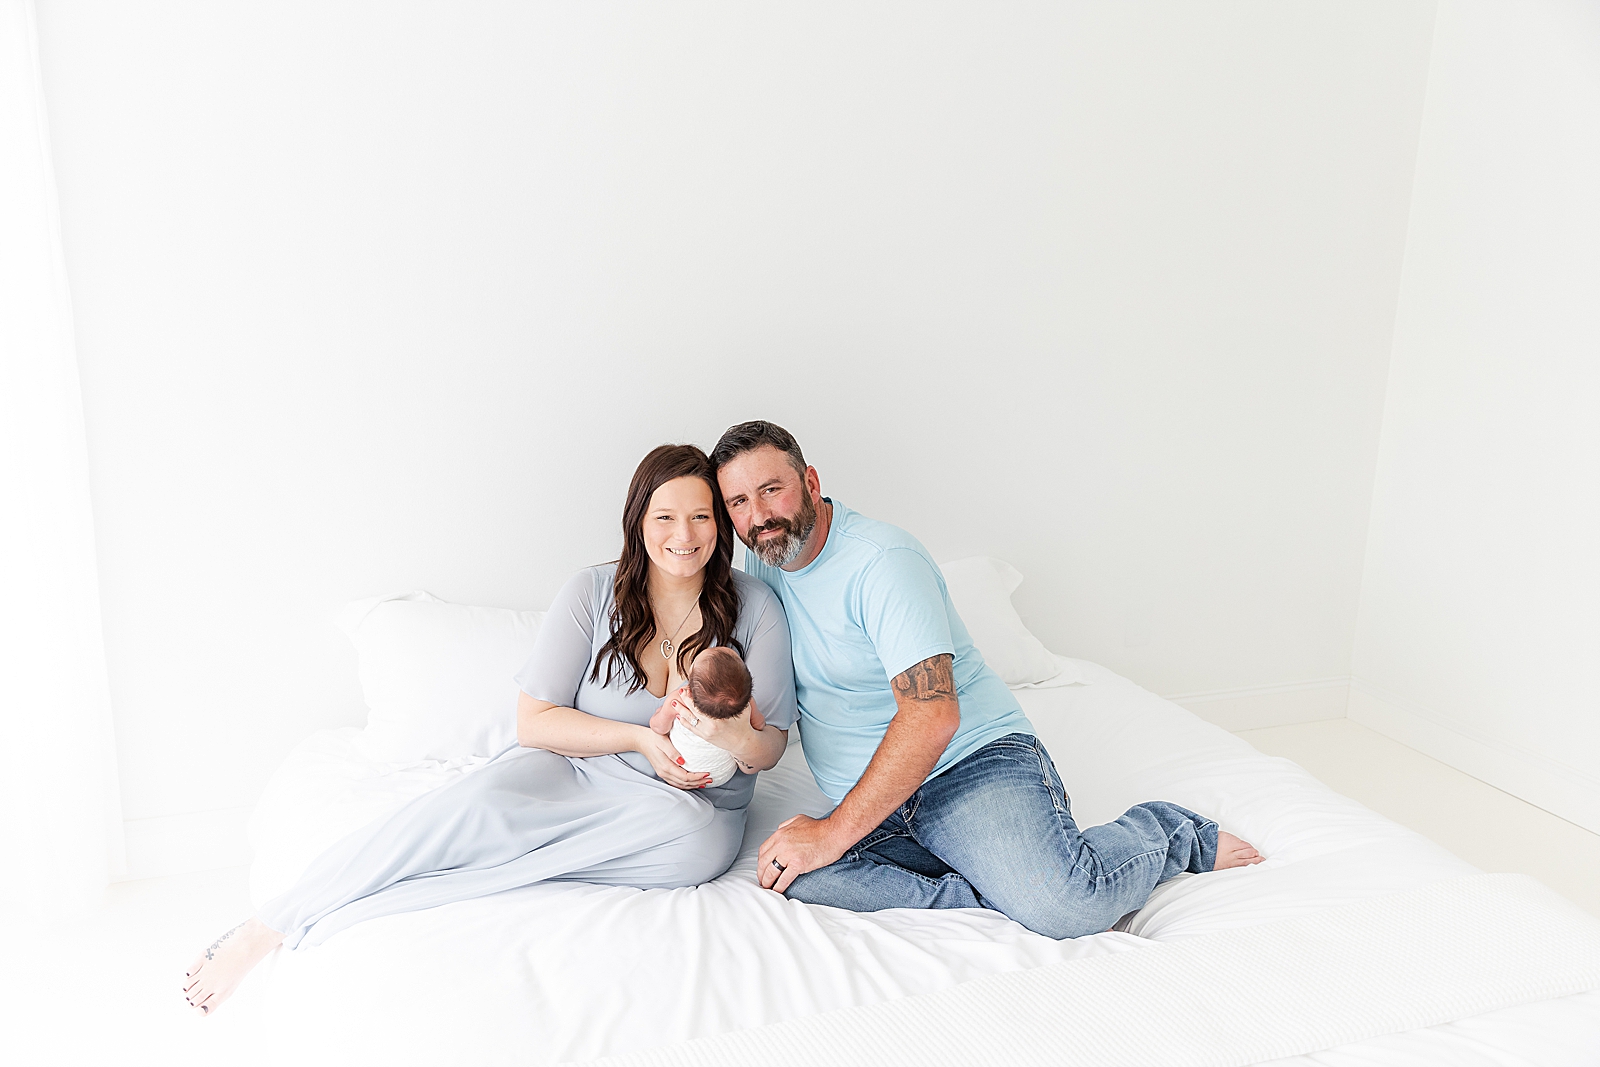 mom and dad sitting on white bed in studio holding baby smiling at camera for newborn photos